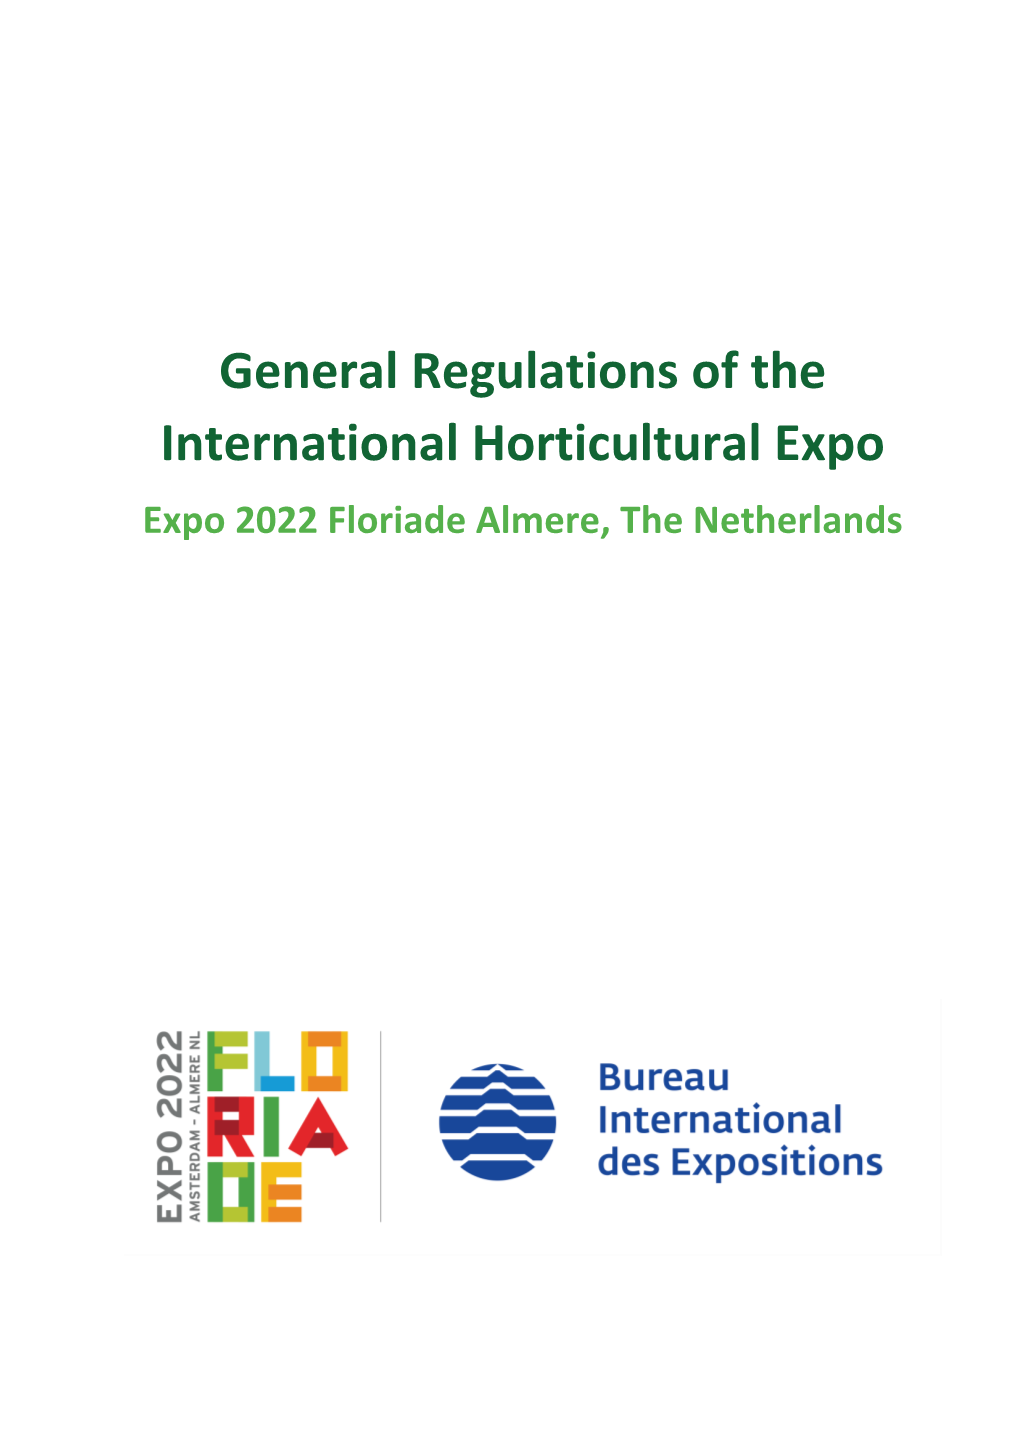 General Regulations of the International Horticultural Expo Expo 2022 Floriade Almere, the Netherlands